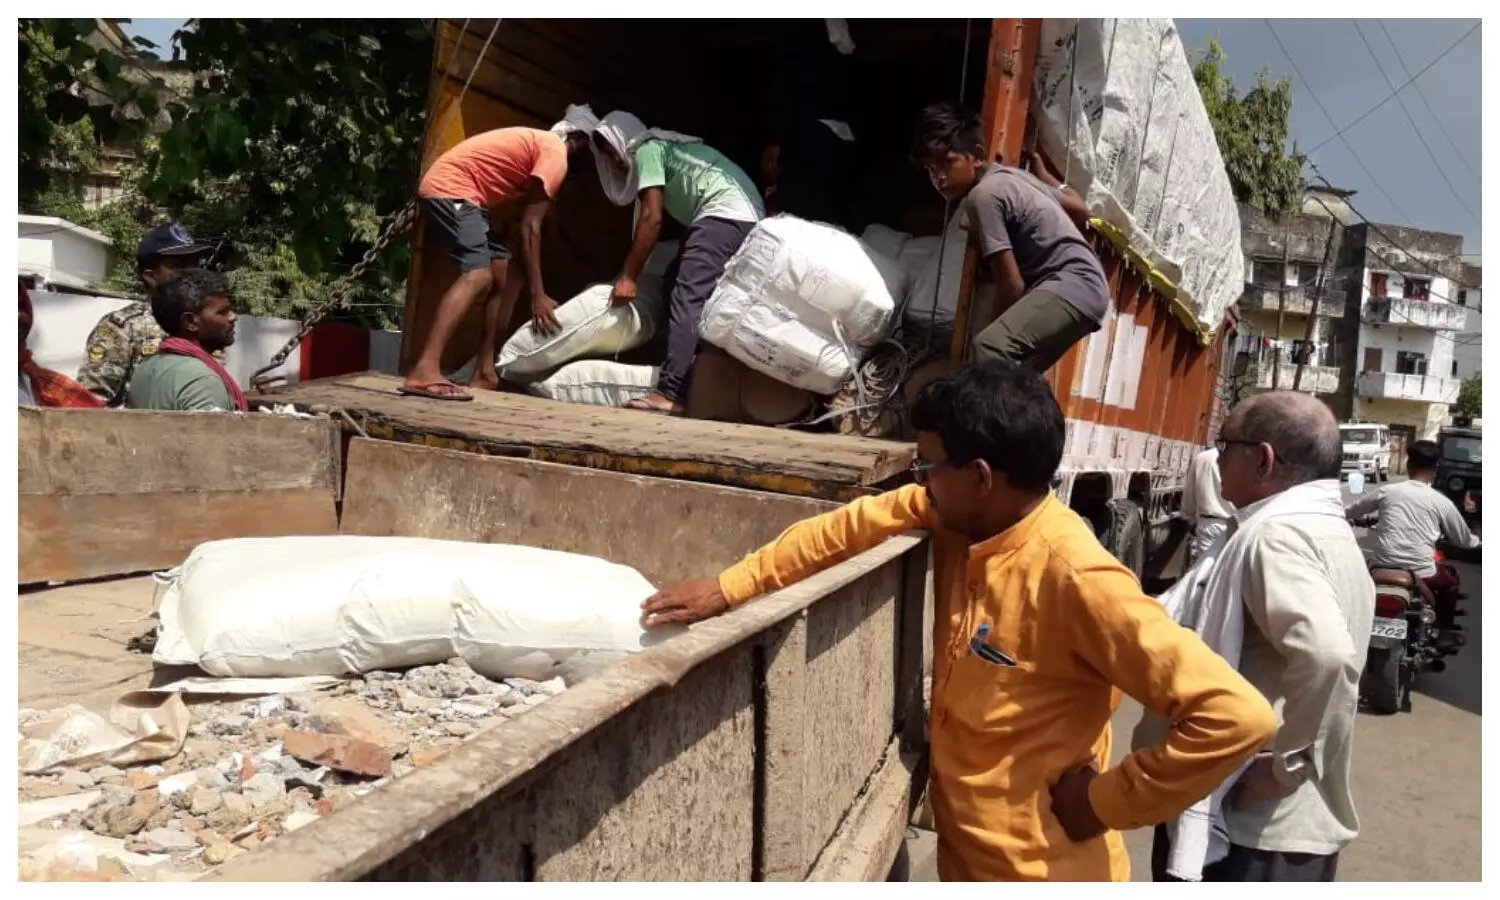 21 quintals of polythene confiscated in Gorakhpur